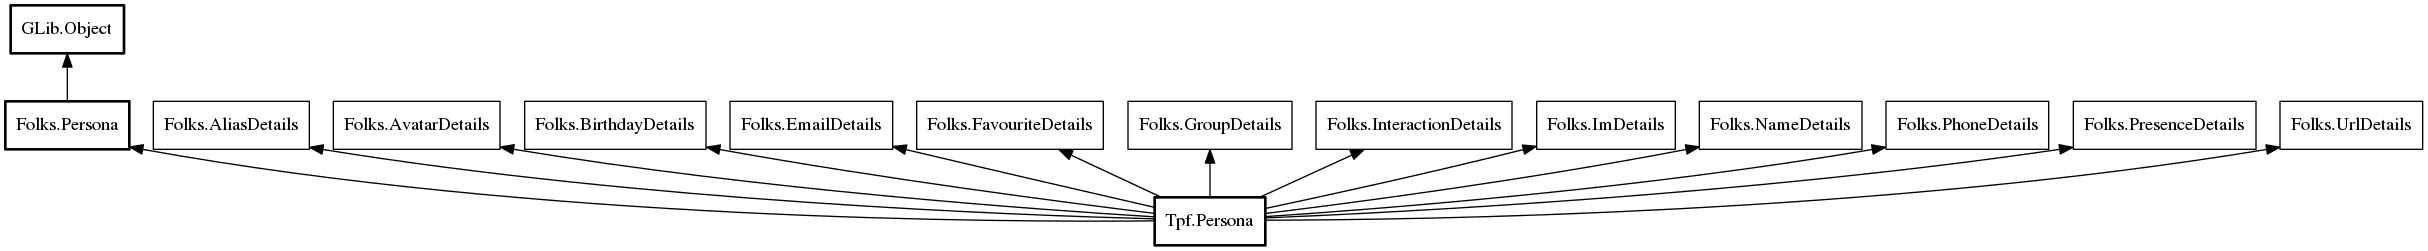 Object hierarchy for Persona